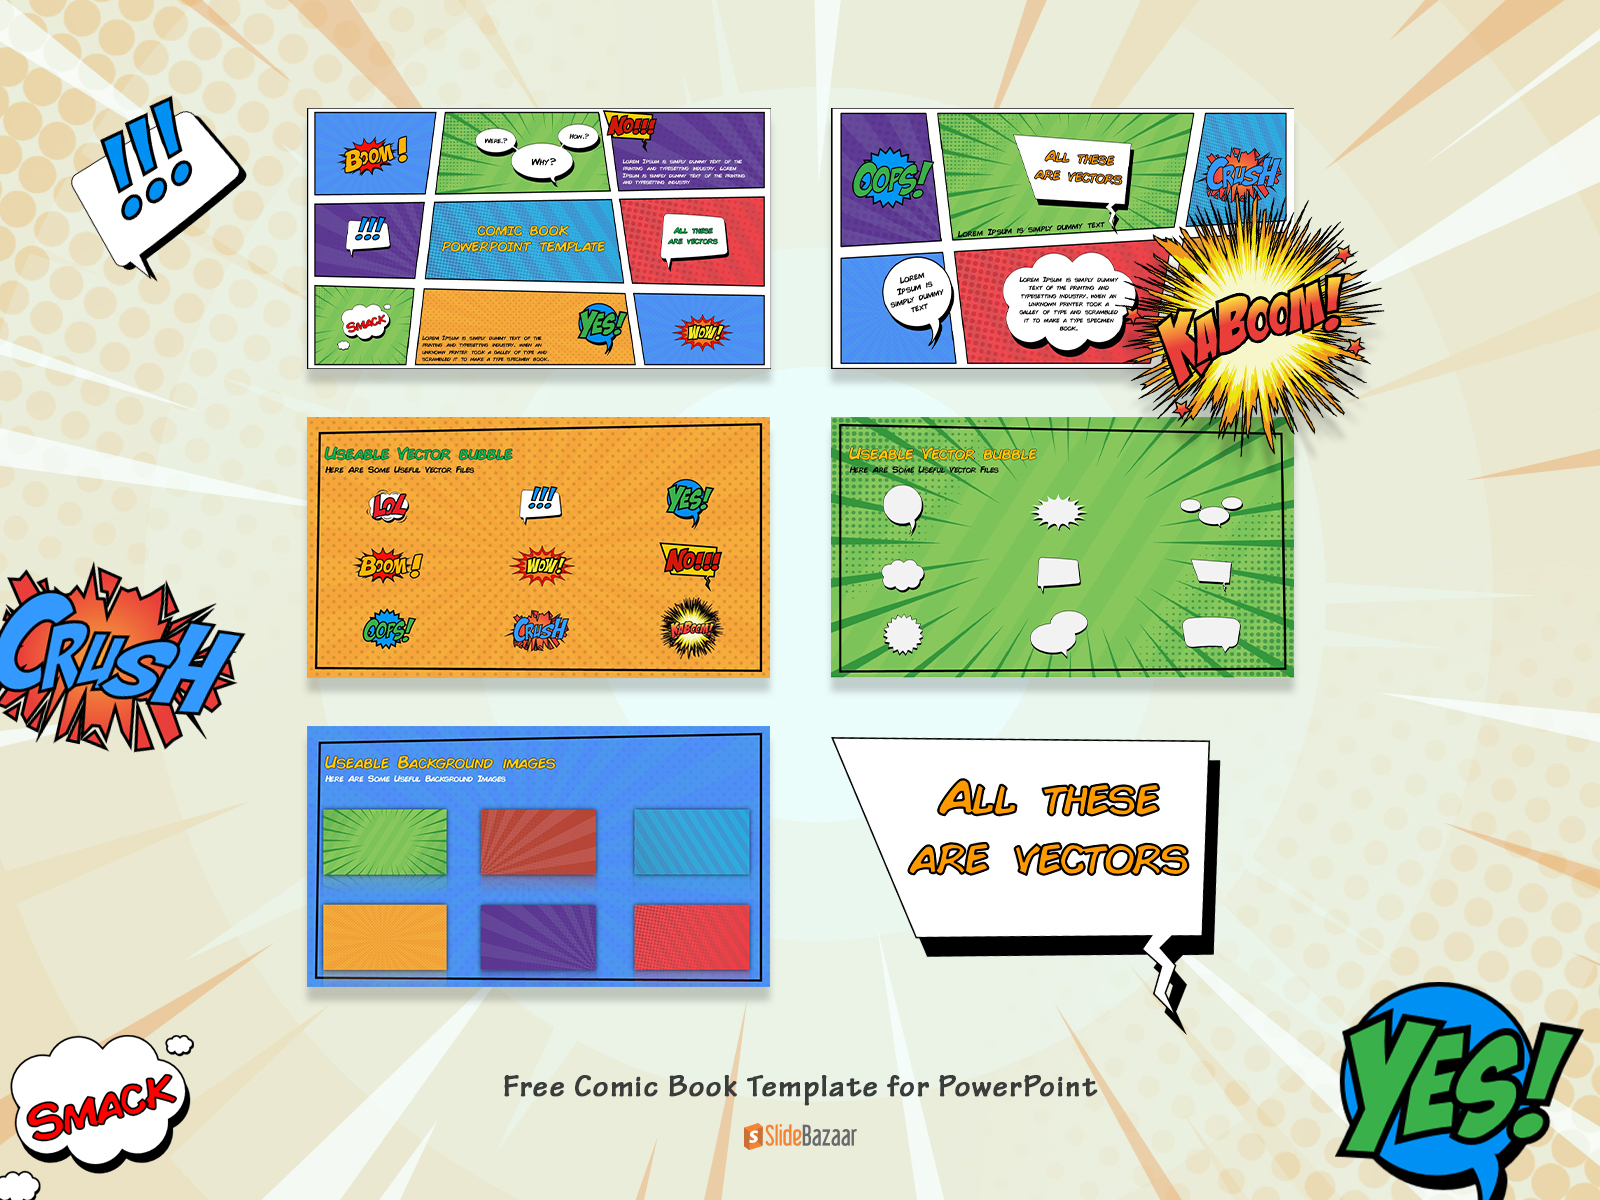 The exciting Free Comic Book PowerPoint Template for Download by